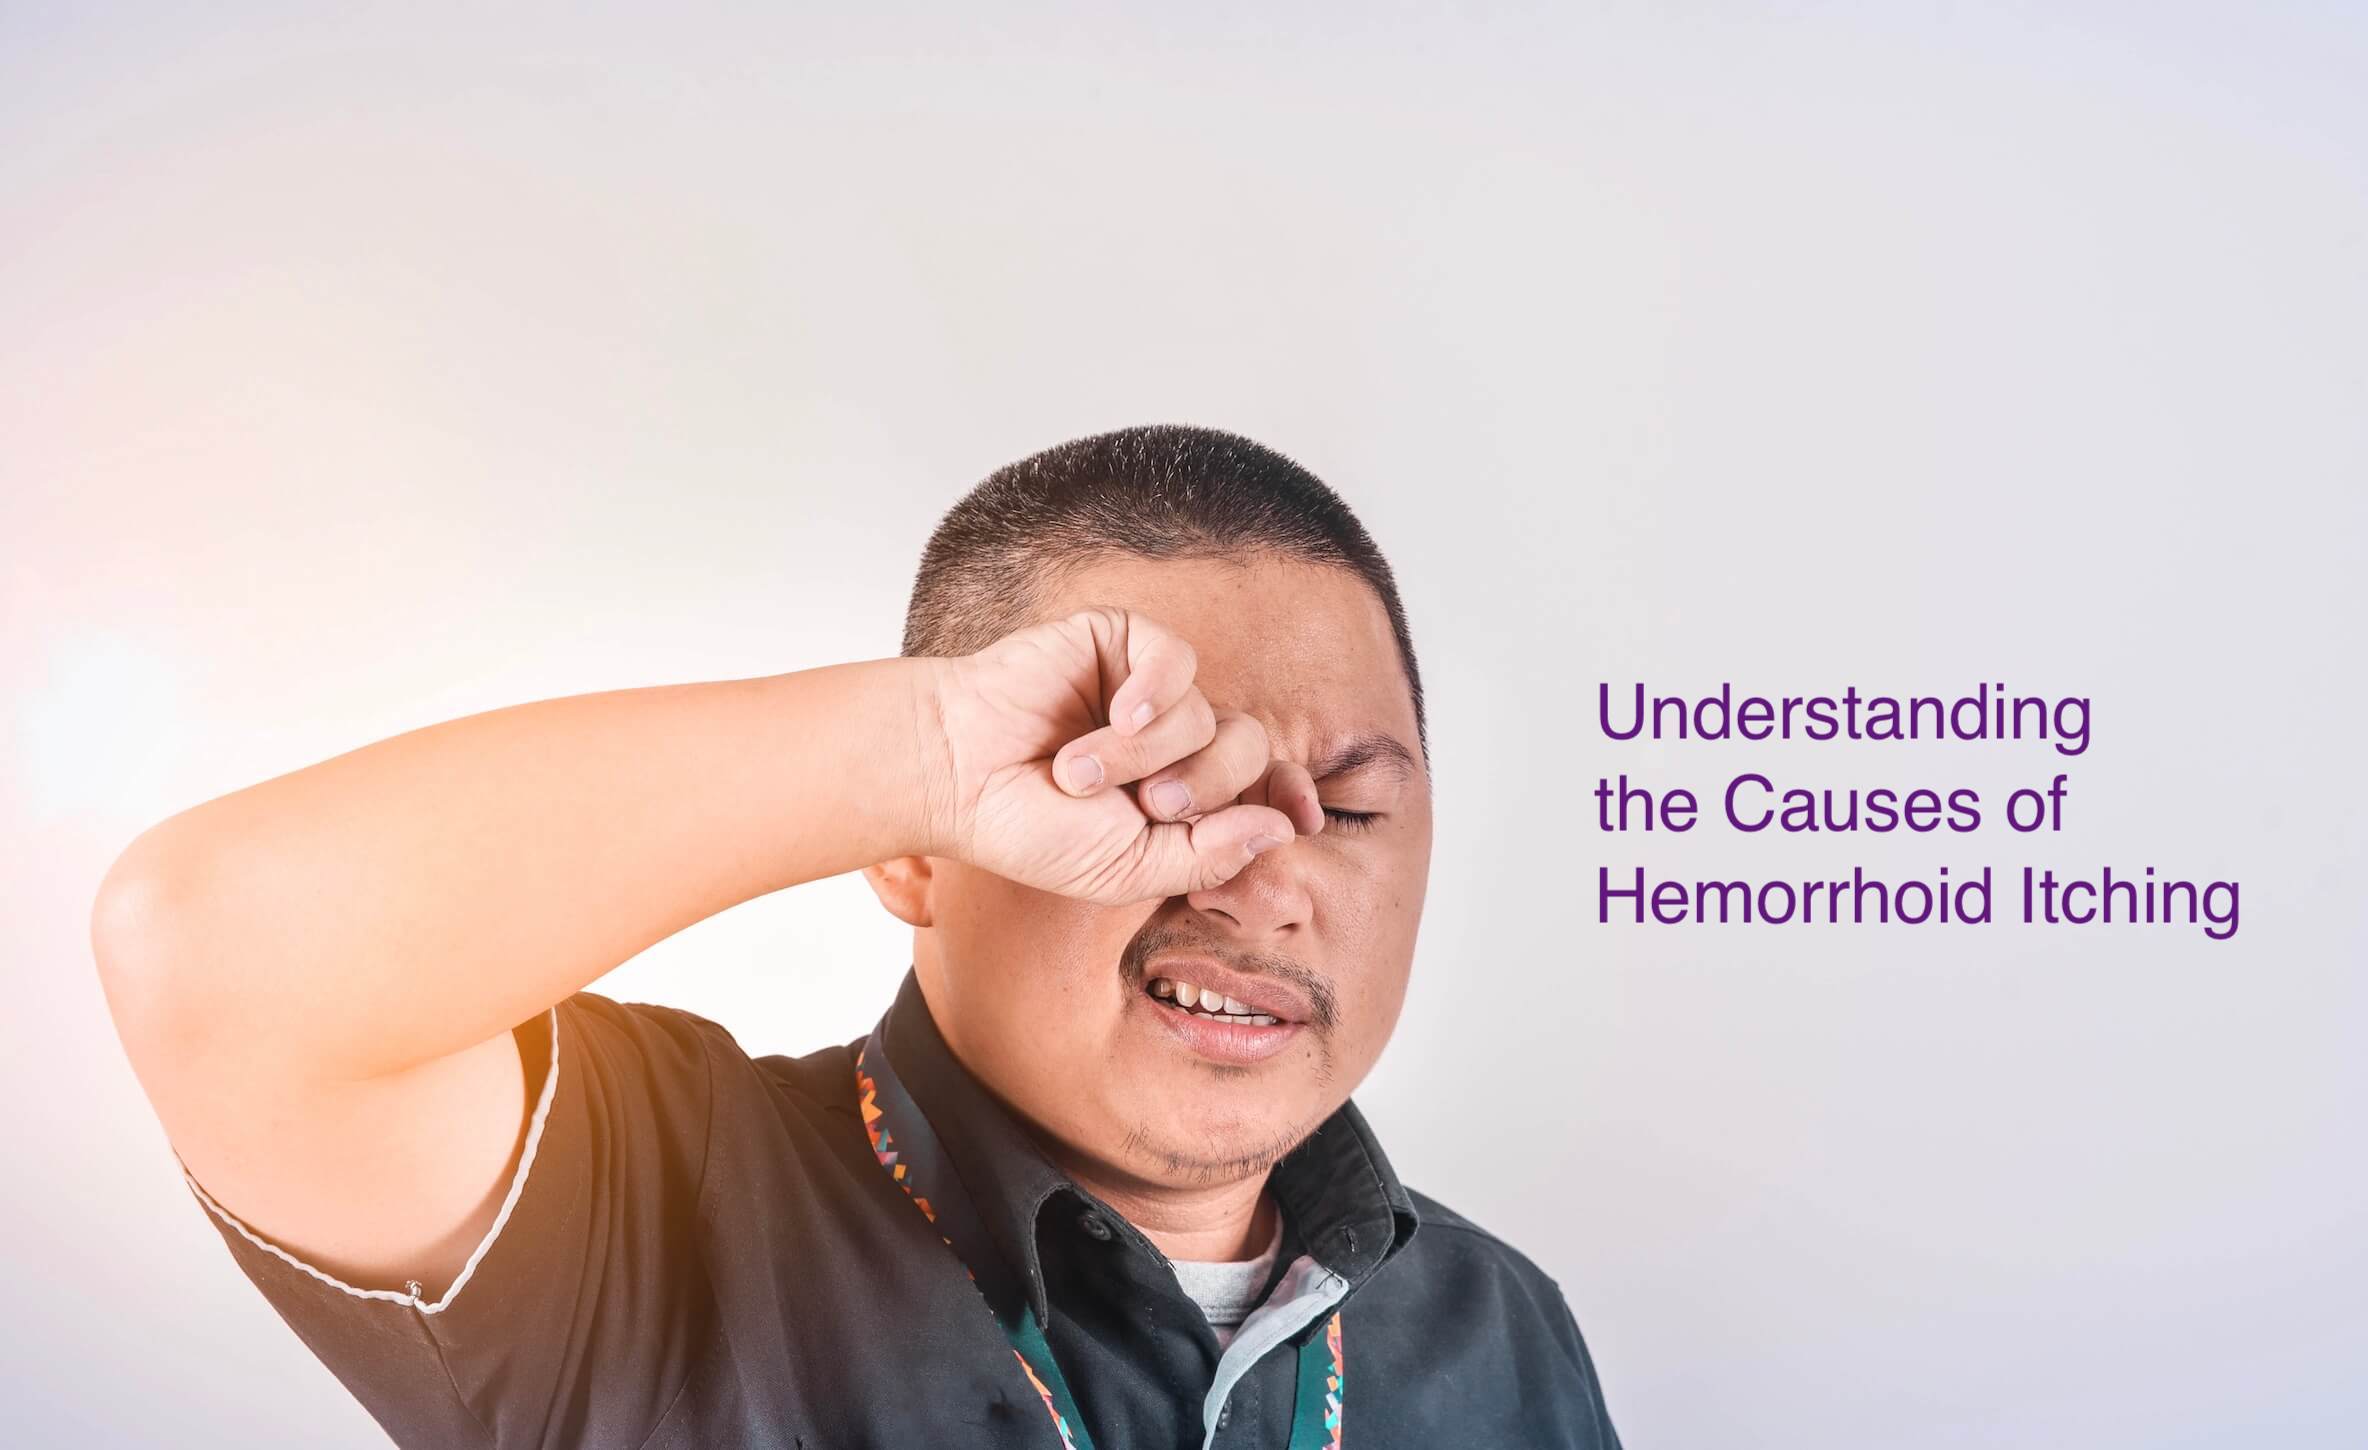 Understanding the Causes of Hemorrhoidal Itching